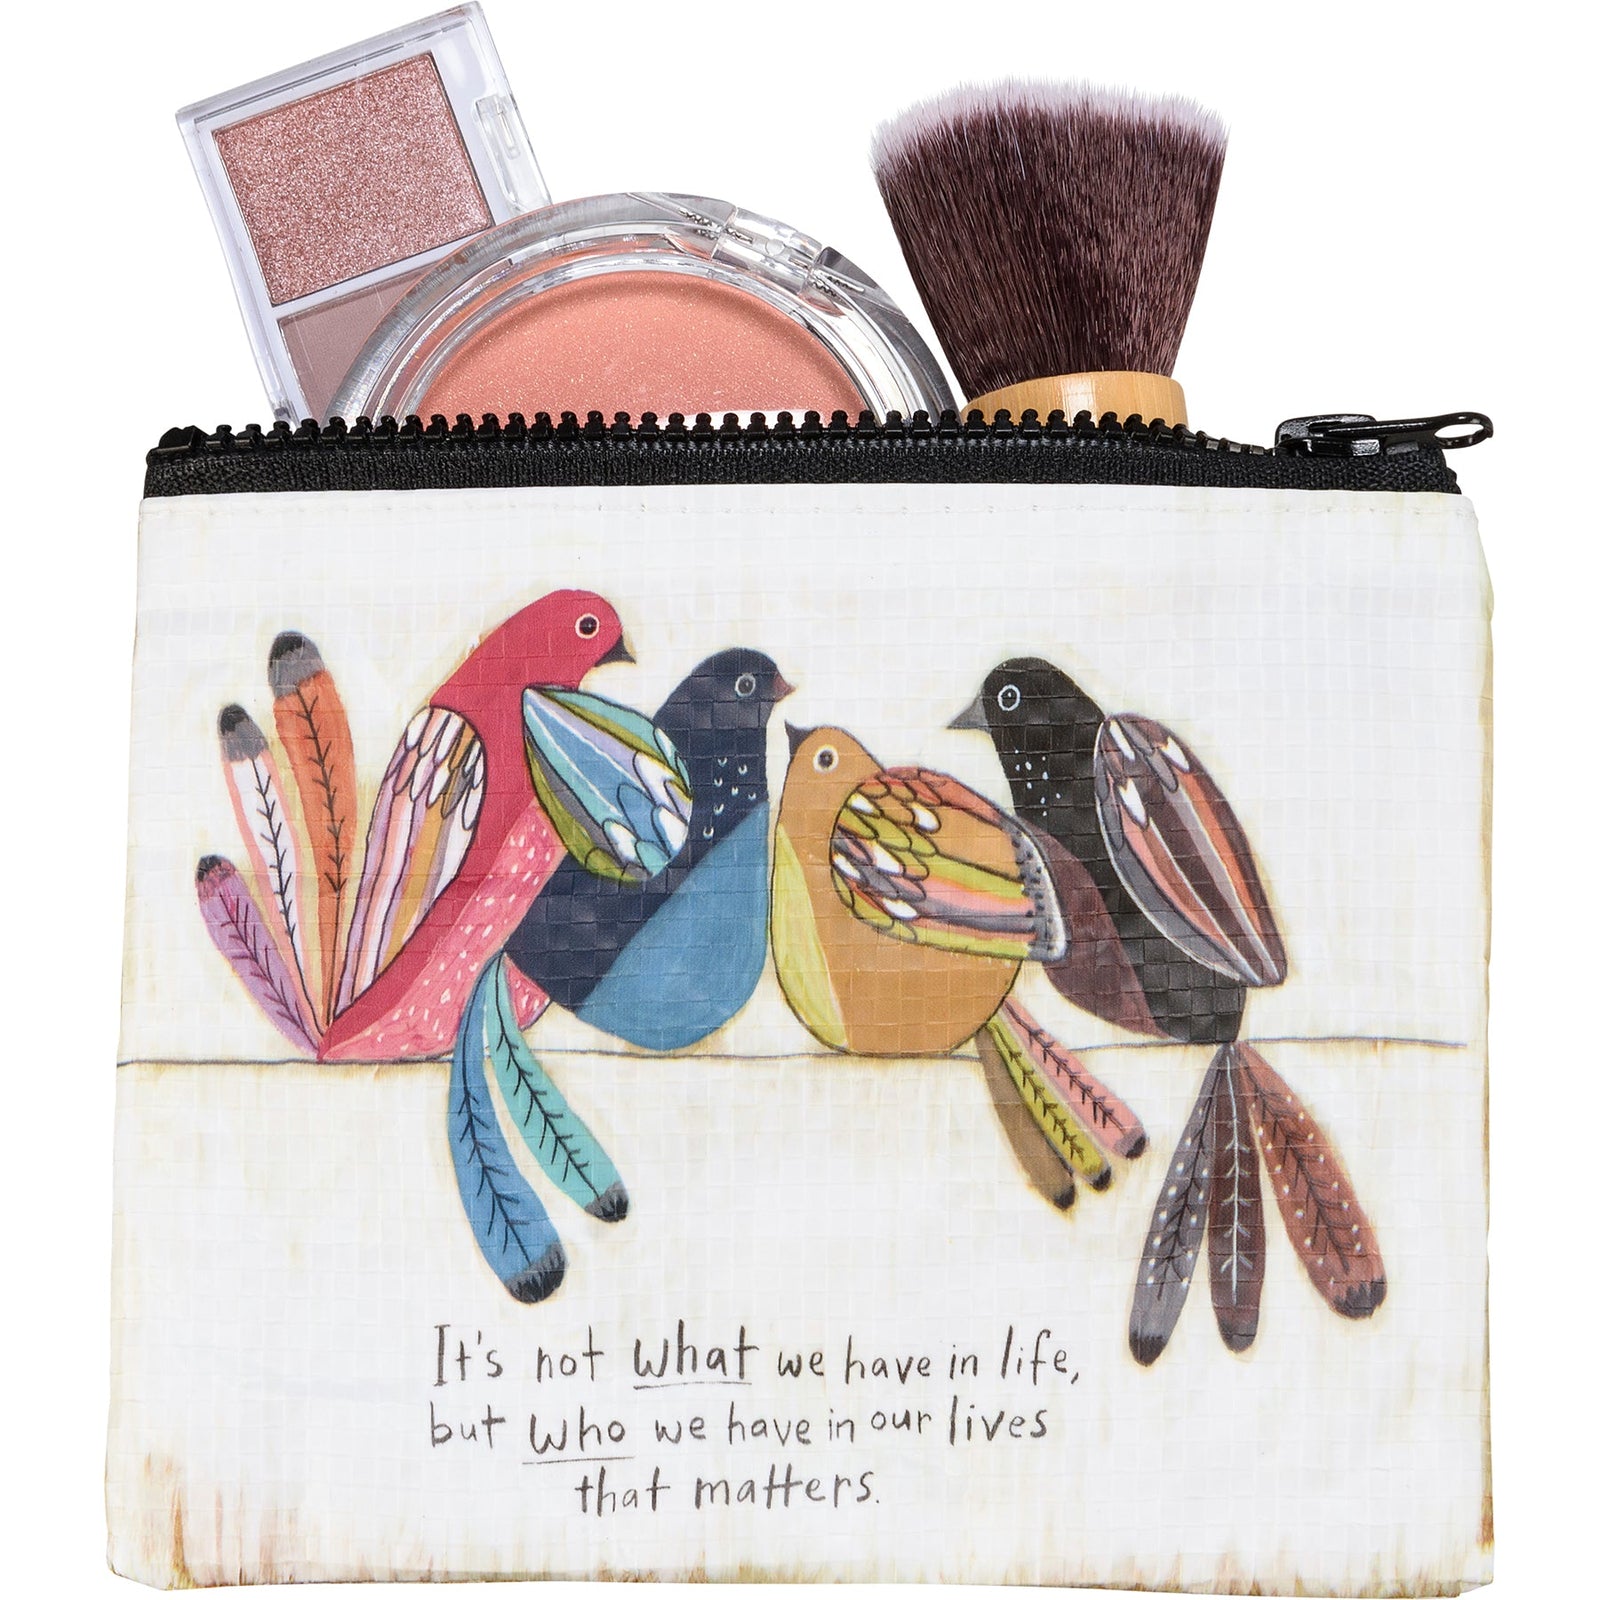 It's Not What We Have In Life, But Who We Have In Our Lives That Matters Zipper Wallet | Recycled Material Organizer Pouch | 5.25" x 4.25"